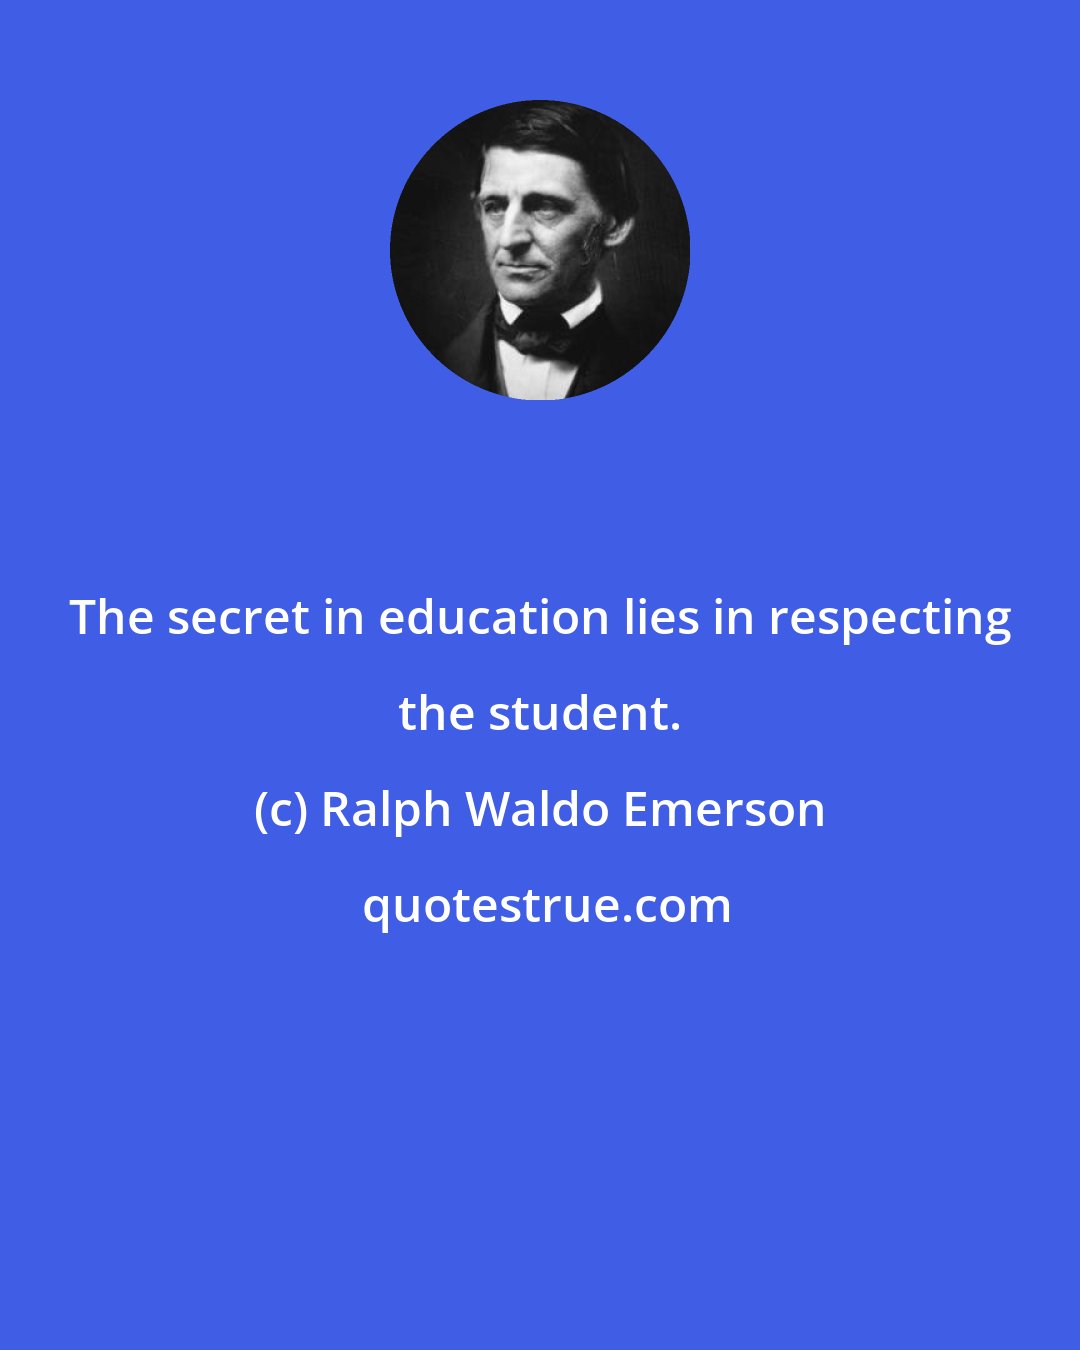 Ralph Waldo Emerson: The secret in education lies in respecting the student.